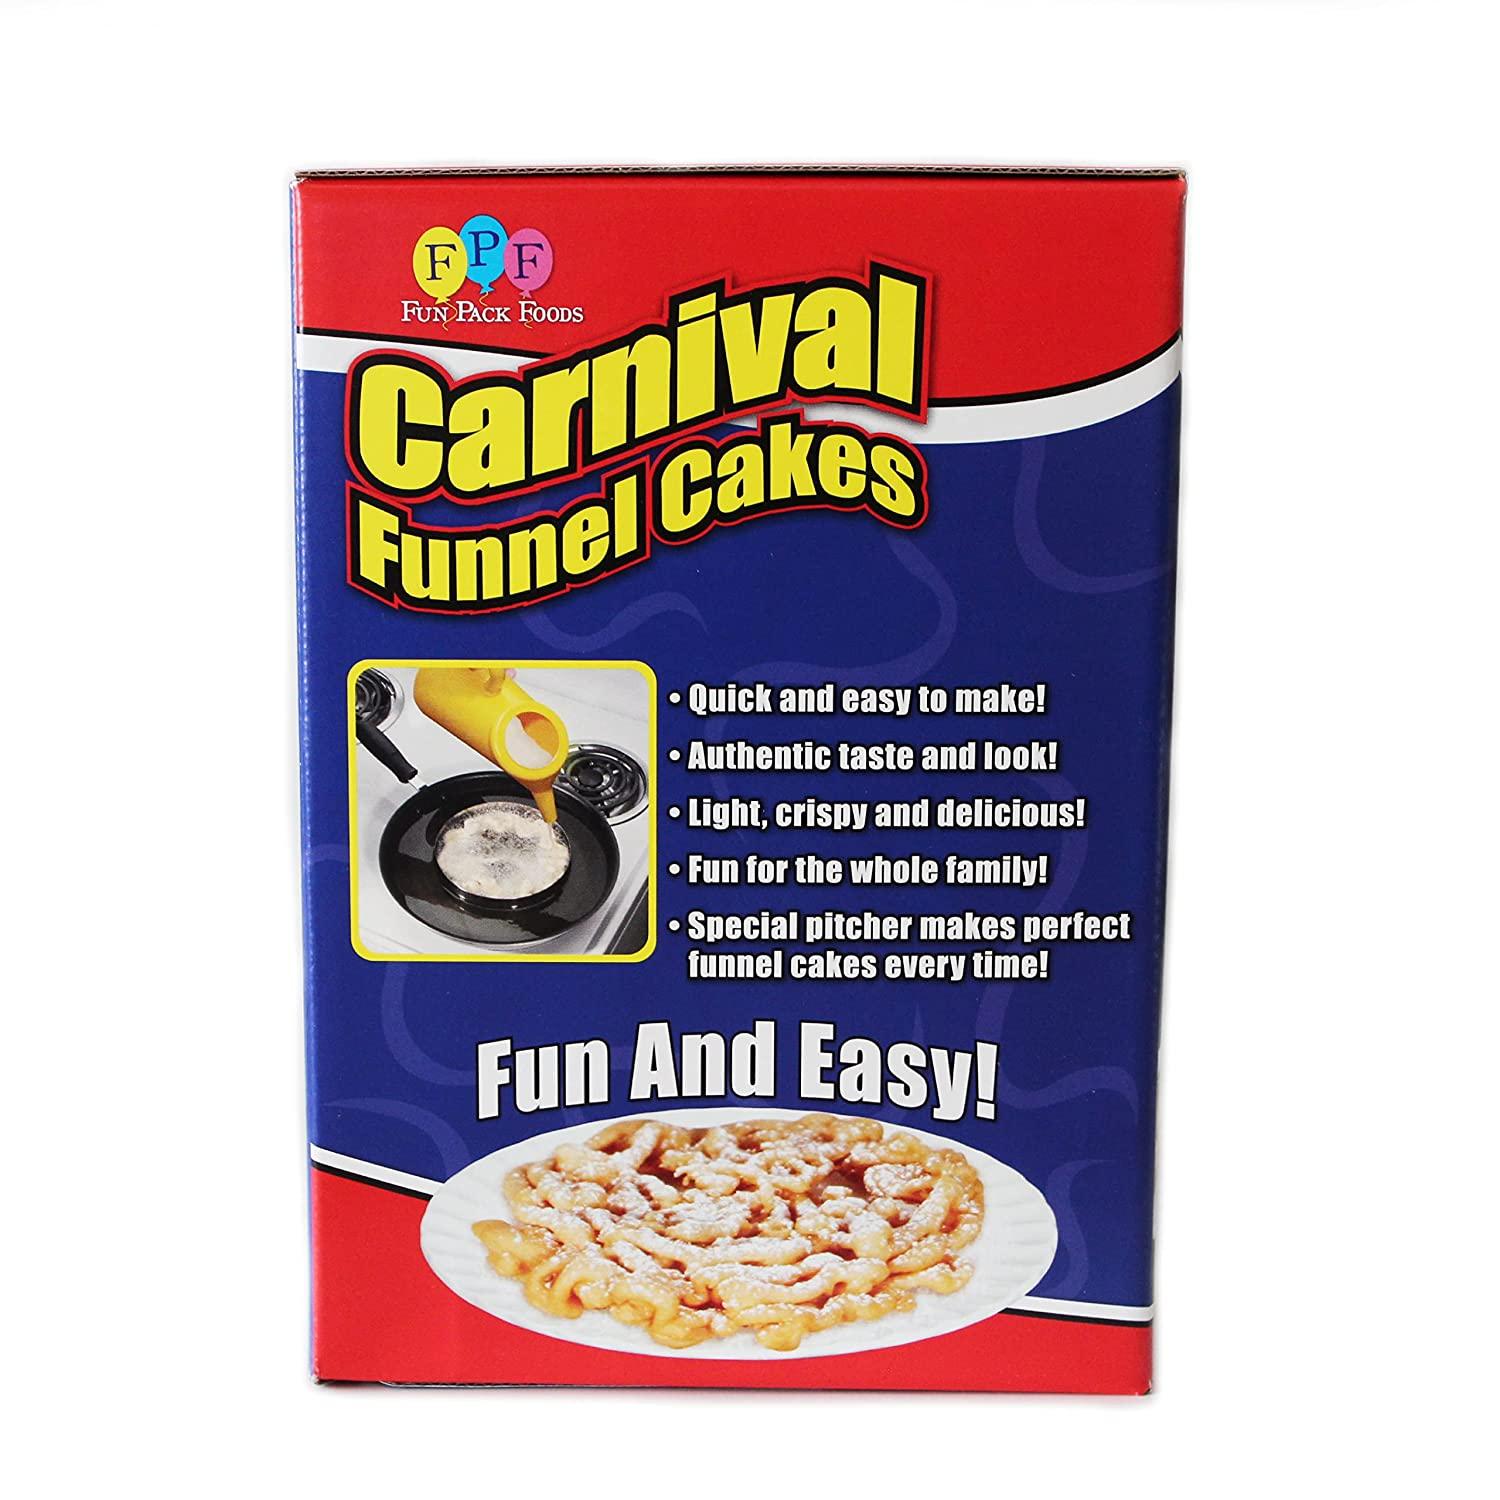 Funnel Cake Pouring Pitcher - 2 Qt. (Carnival King)